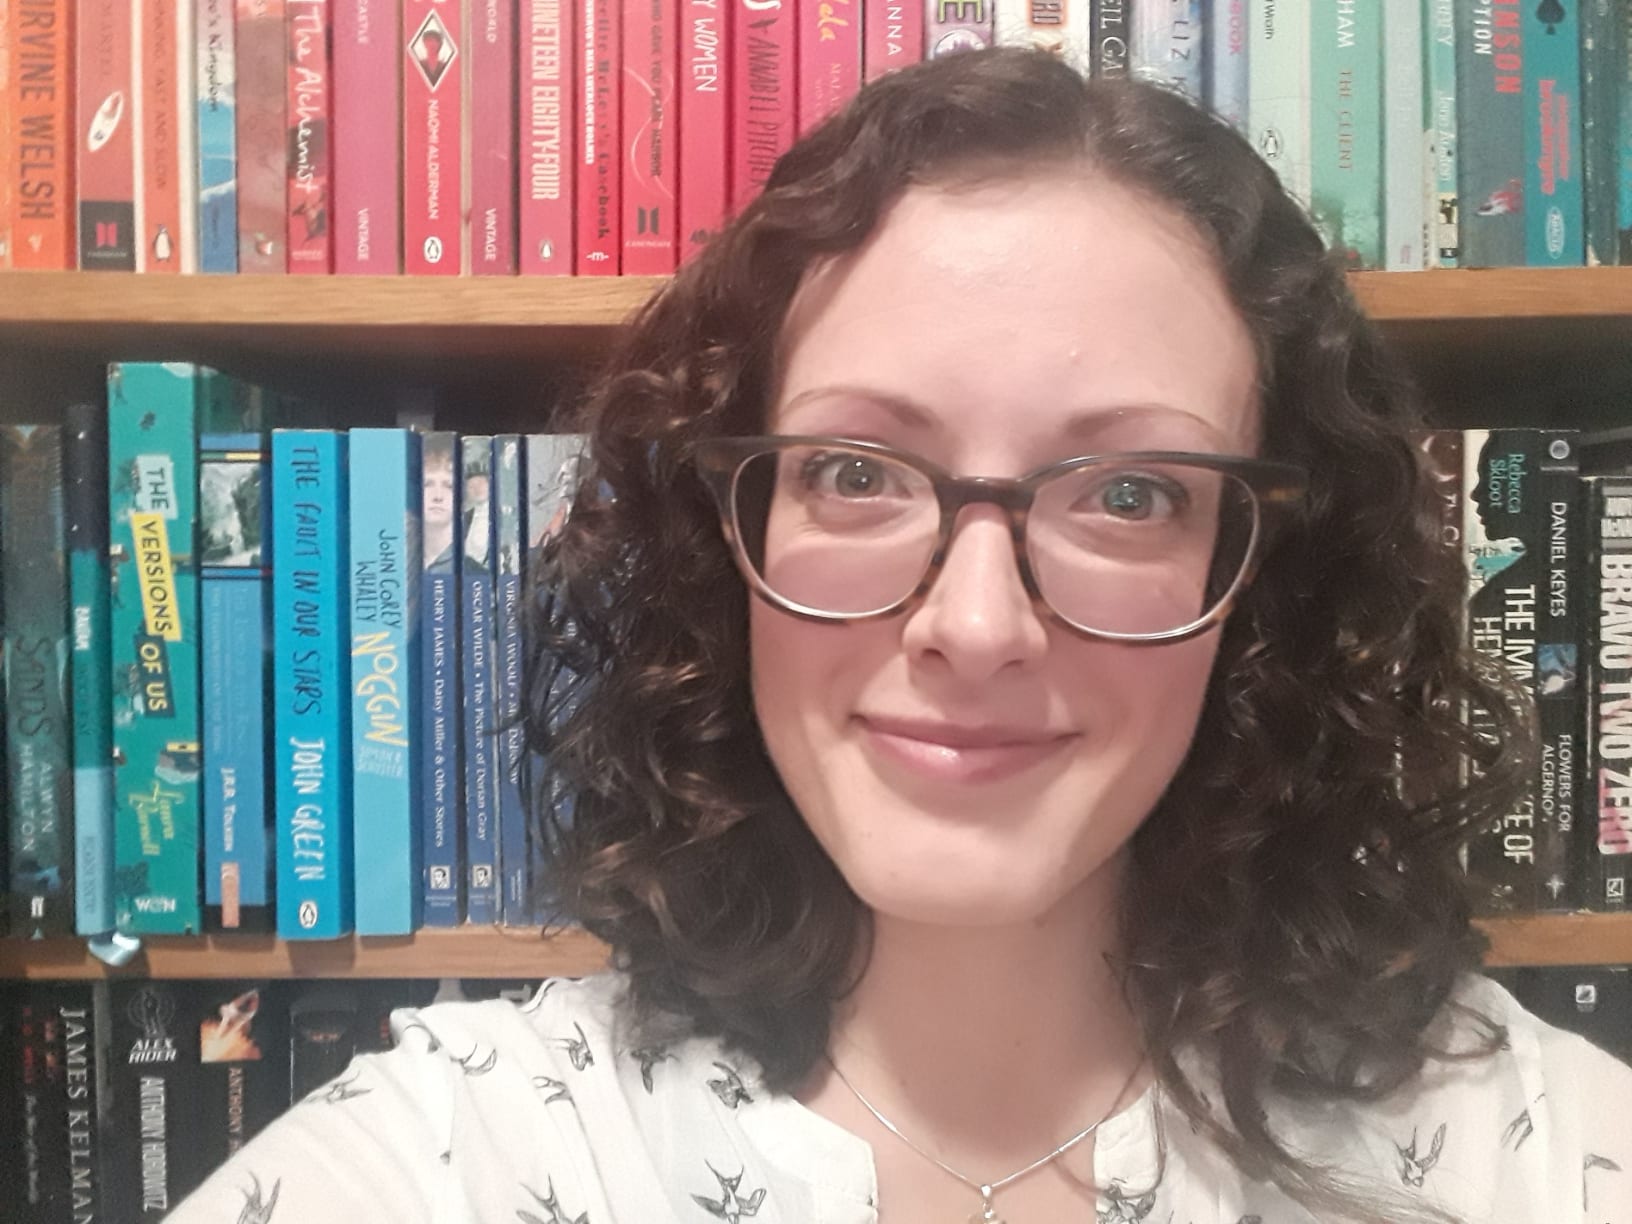 This is a photograph of Kirstin Lamb who has shoulder-length, brown, curly hair and is wearing glasses. She is pictured in from of a bookshelf with brightly coloured books on it.